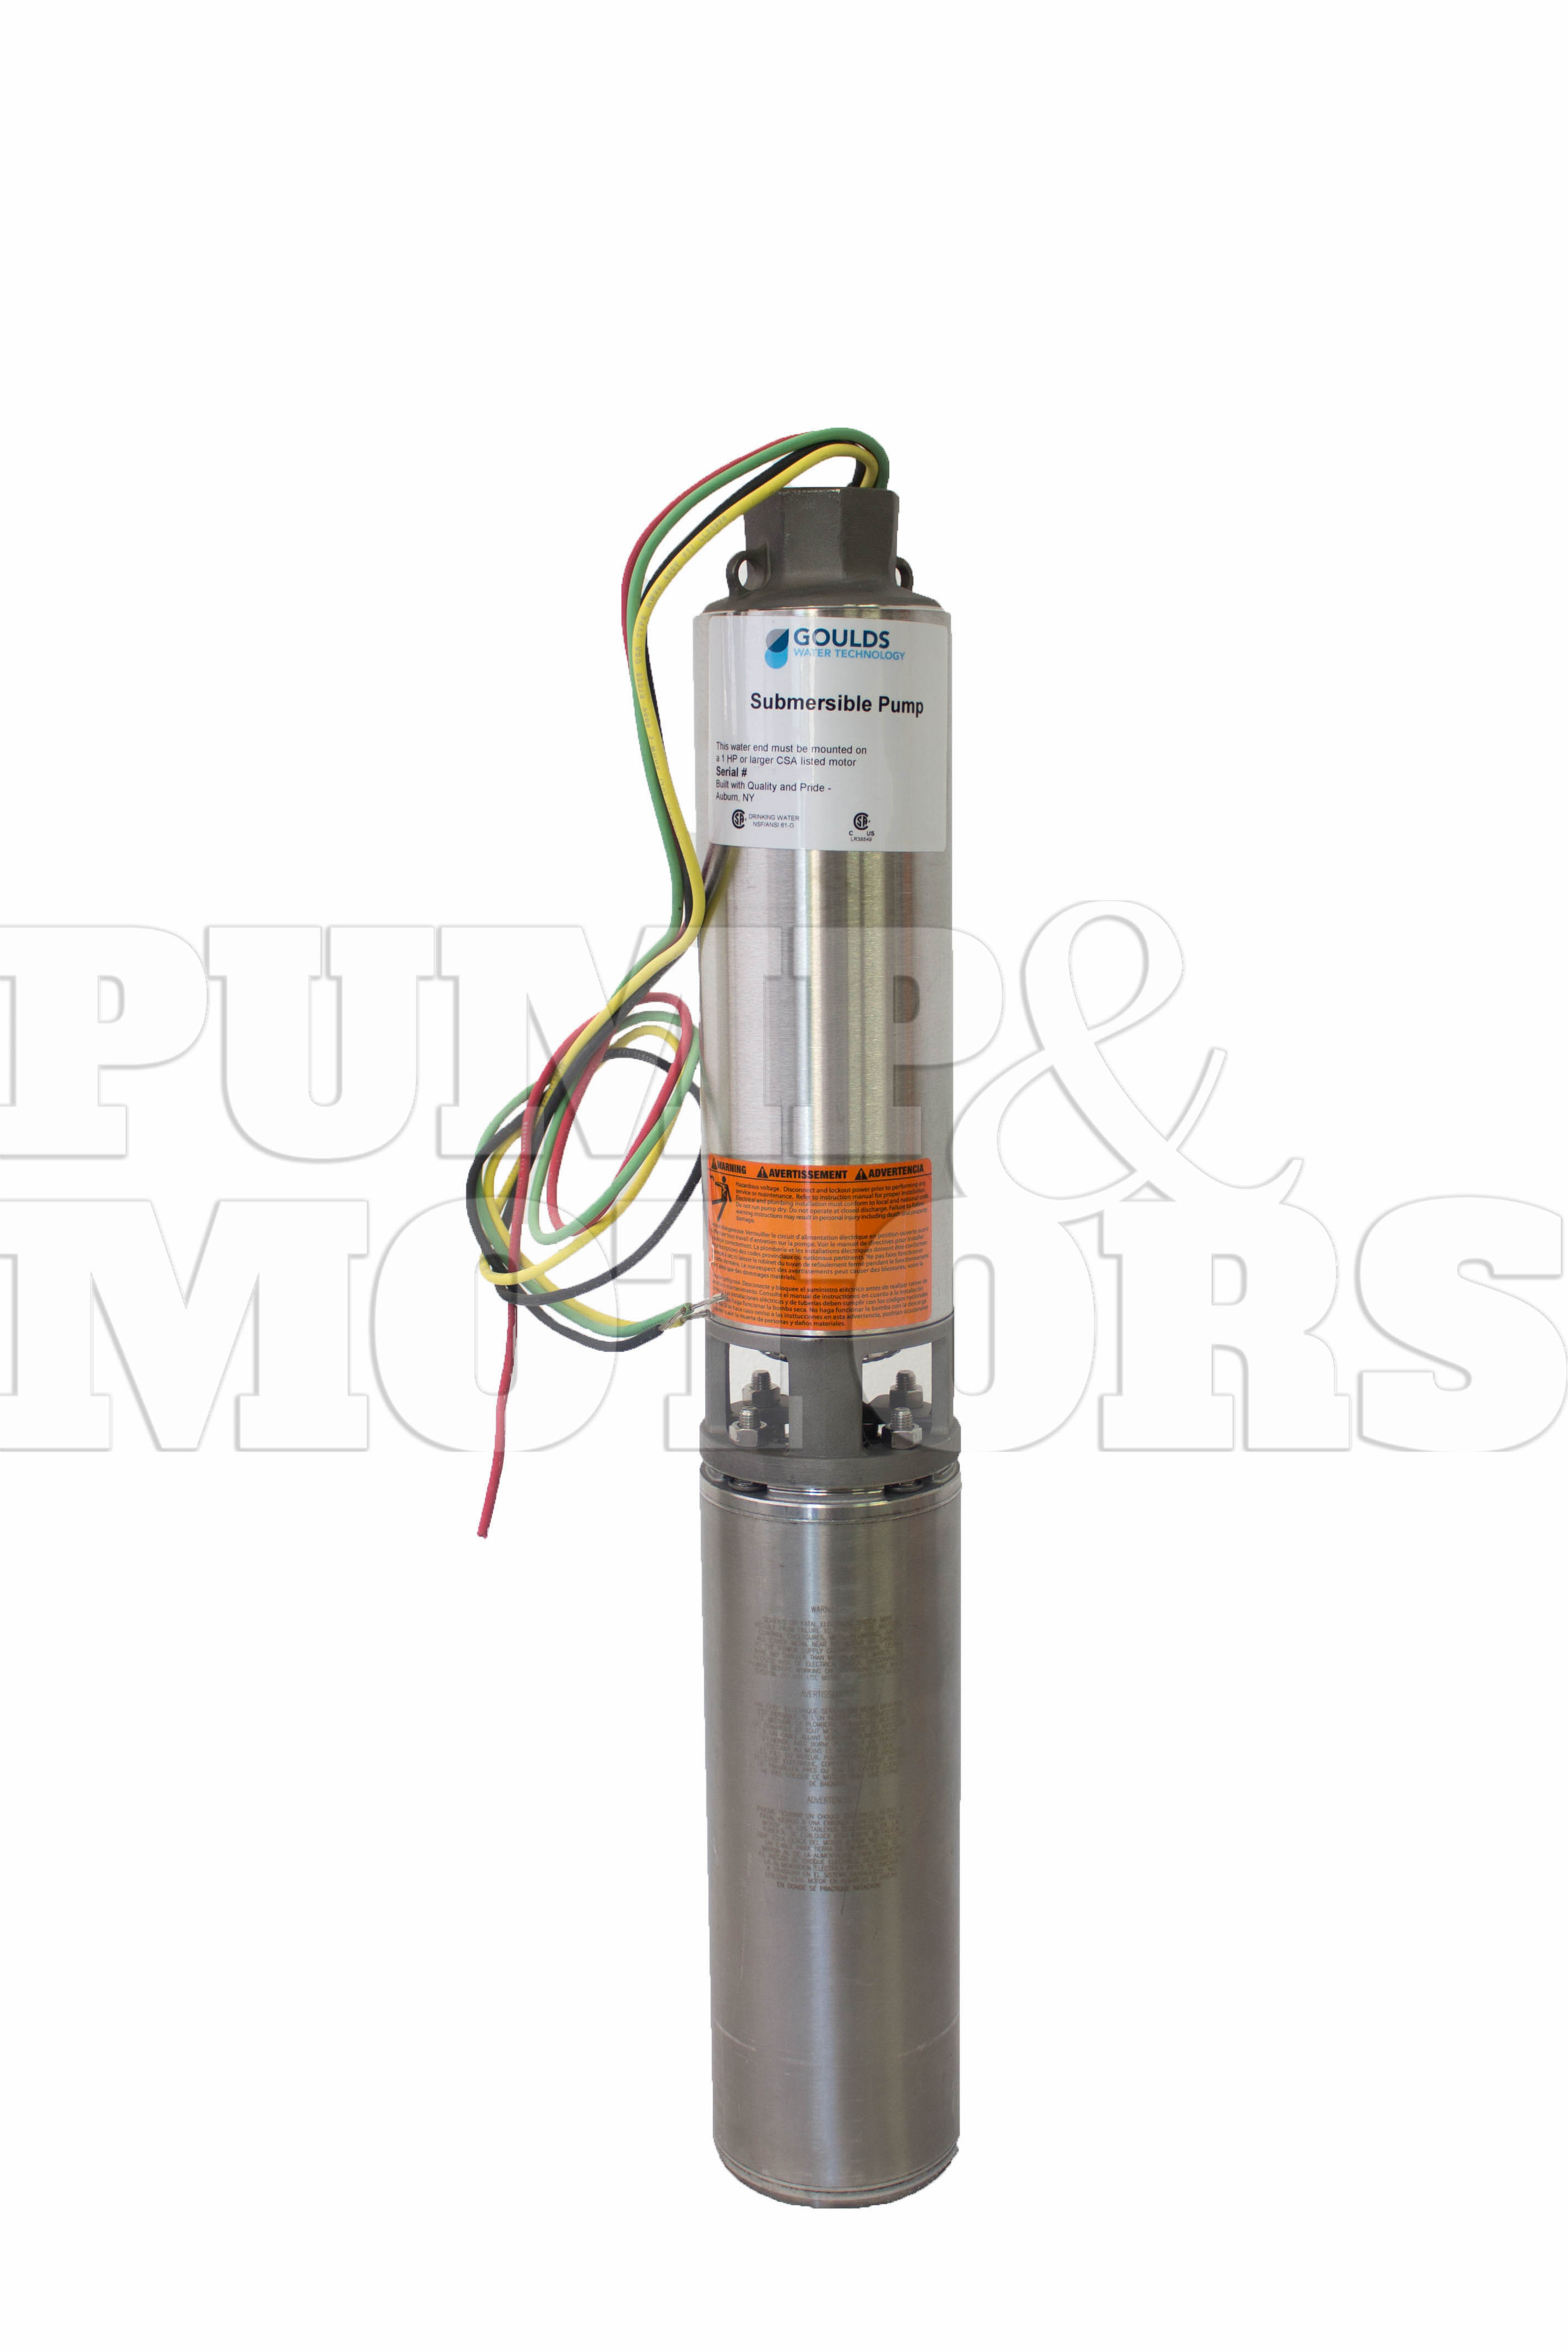 35GS15432C Goulds 35GPM Submersible Water Well Pump 1.5HP